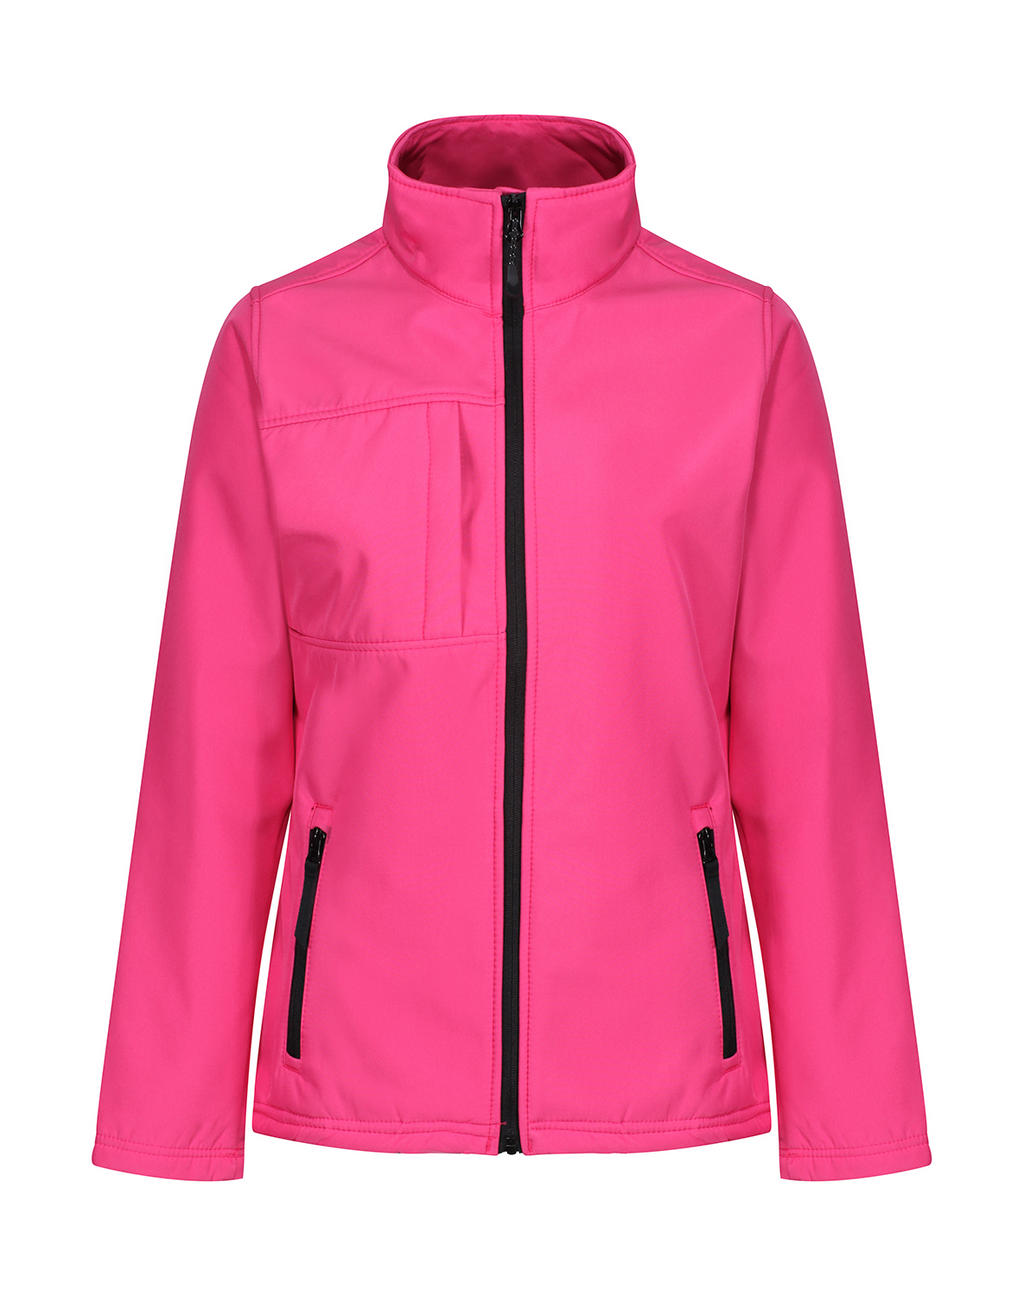  Womens Octagon II Softshell in Farbe Hot Pink/Black